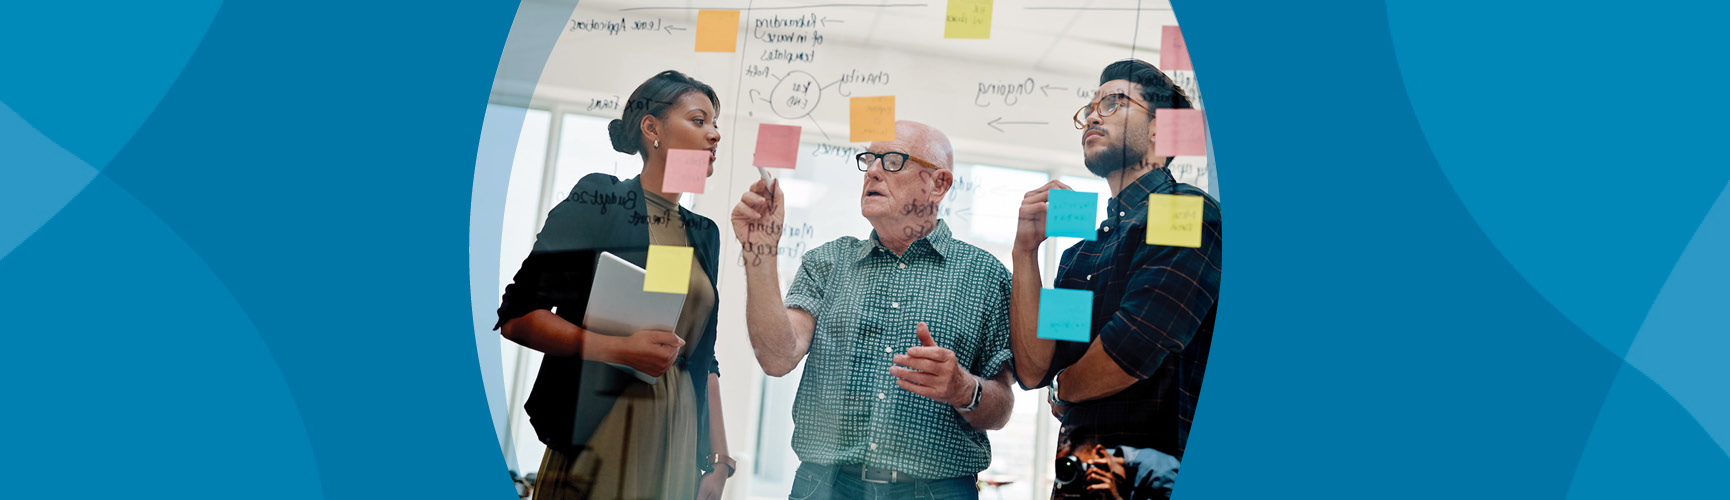 Older adult man brainstorming with innovation team of young man and woman